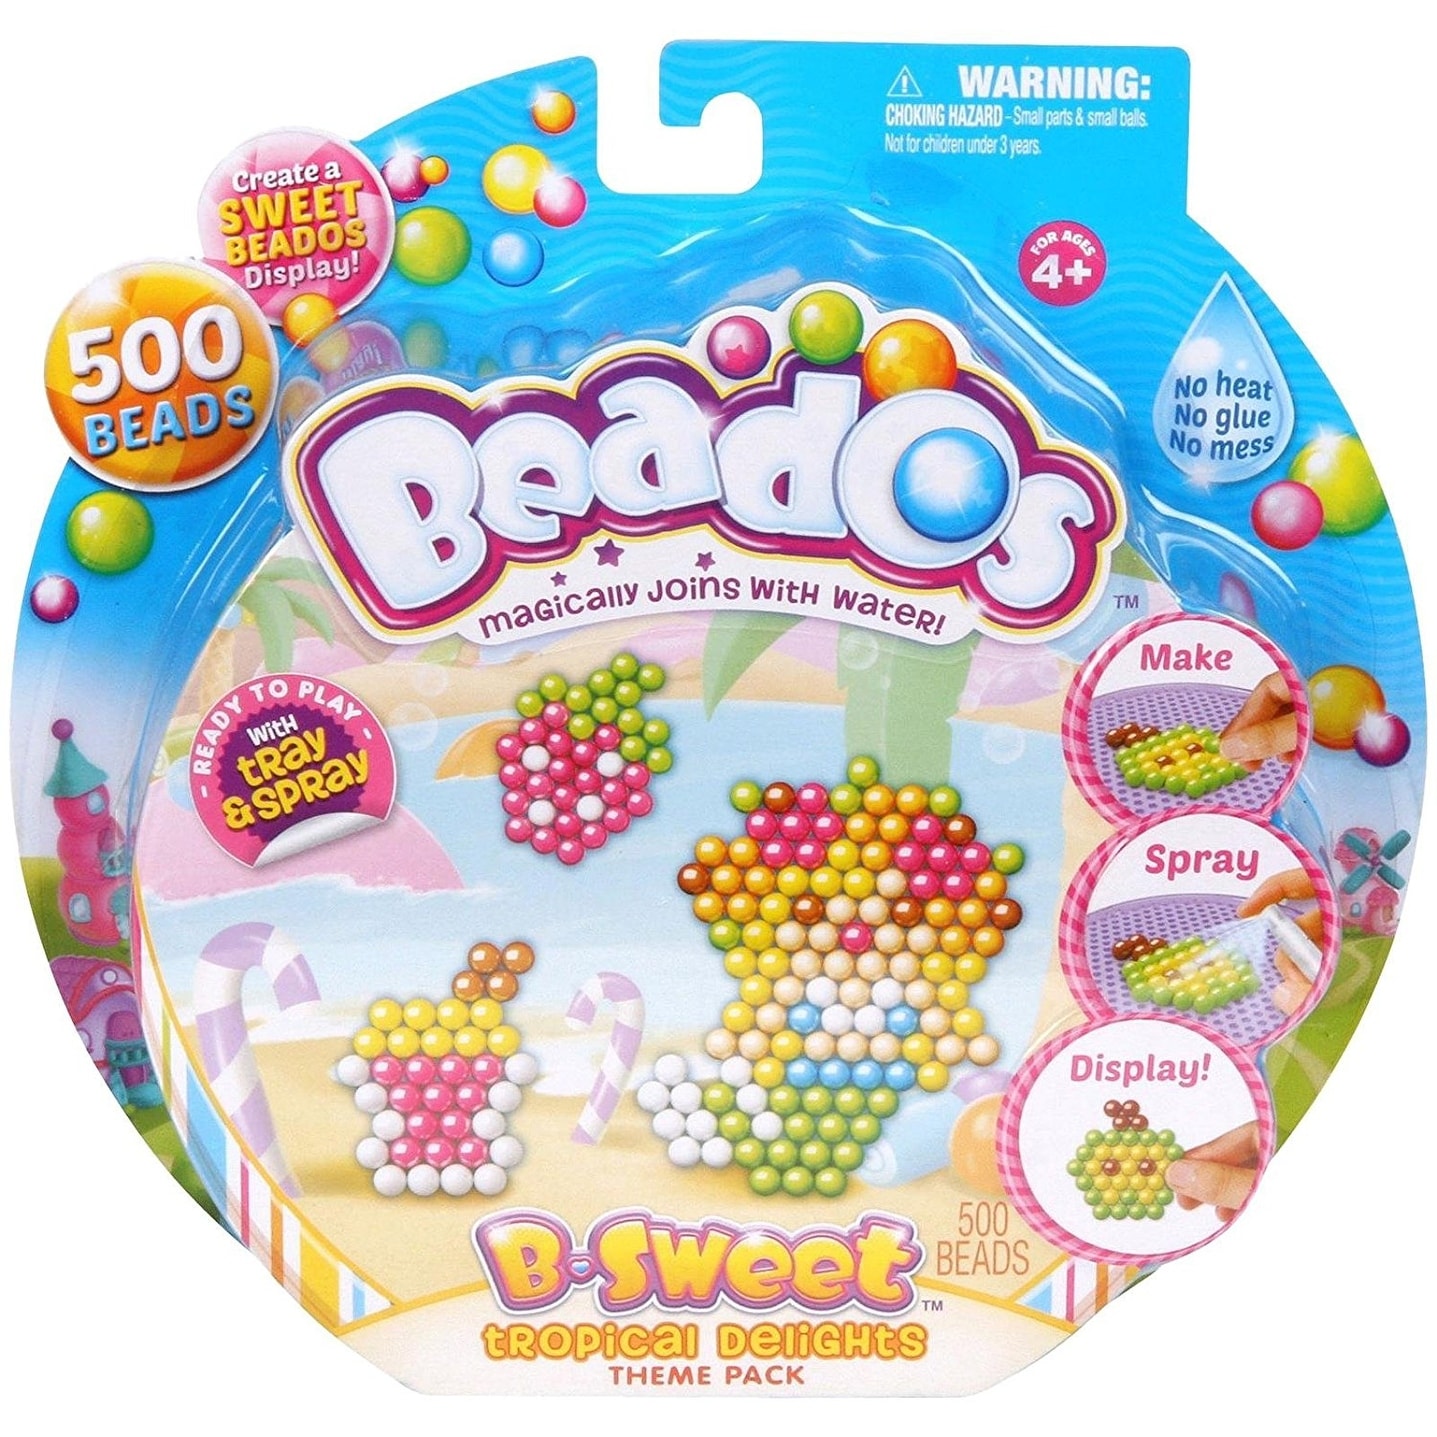 Beados S5 Theme Pack: Tropical Delights - multi - Bed Bath & Beyond -  13931808